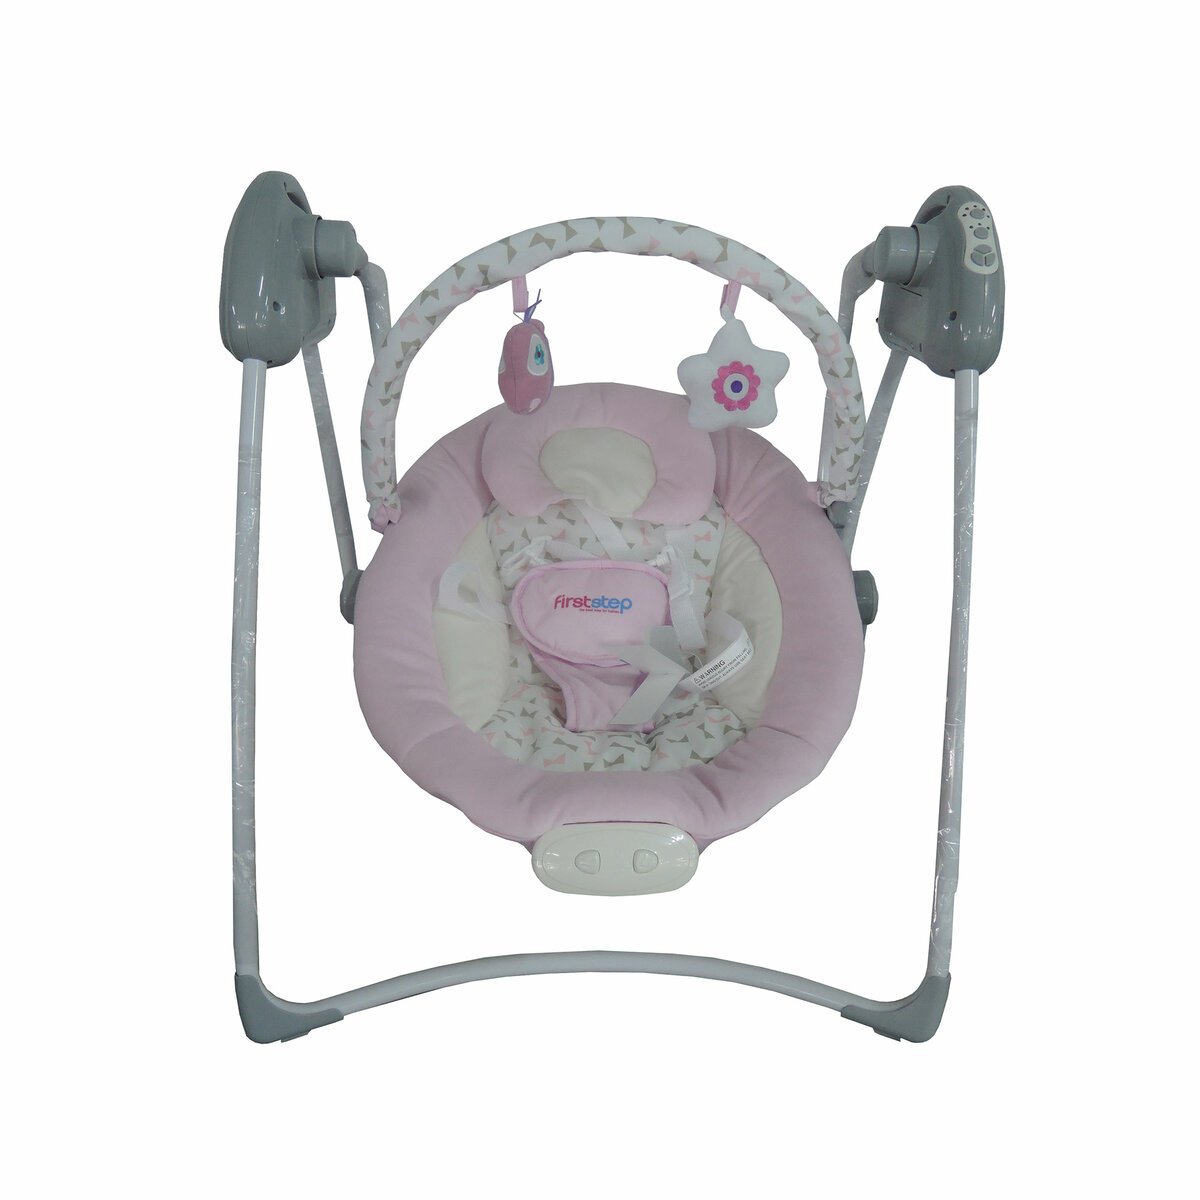 First Step Baby Swing Bed SW-108 Pink